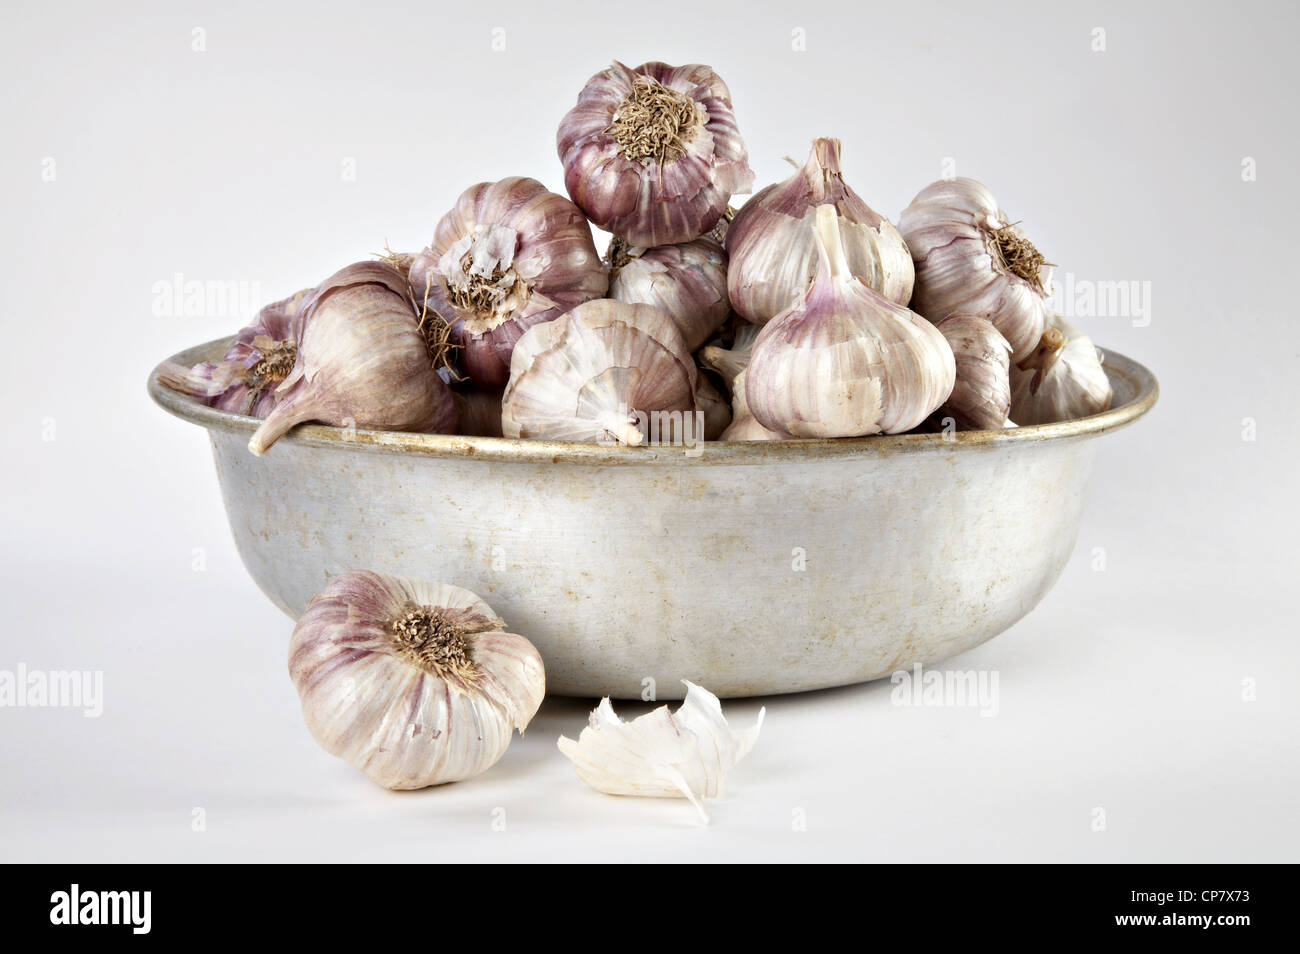 Garlic in a tin bowl on a grey background Stock Photo